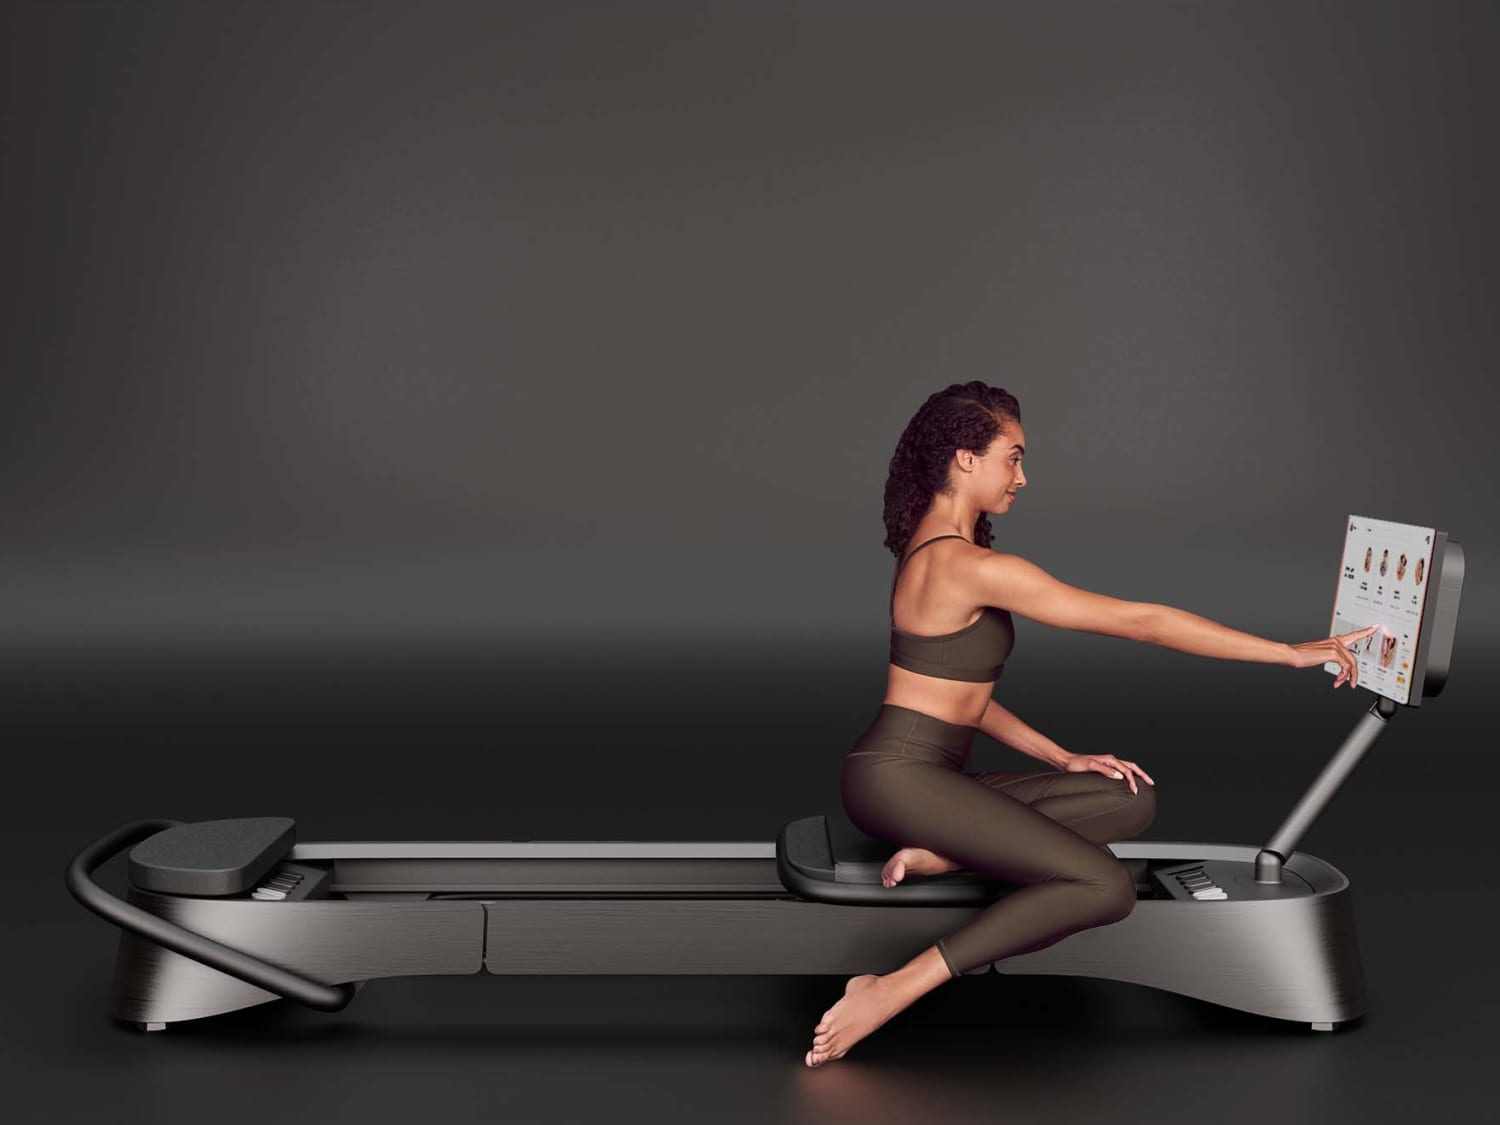 How to assemble the Pilates Power Gym reformer, Watch: So easy to assemble  and move around your home - the Pilates Power Gym mini reformer is the best  at-home workout around!